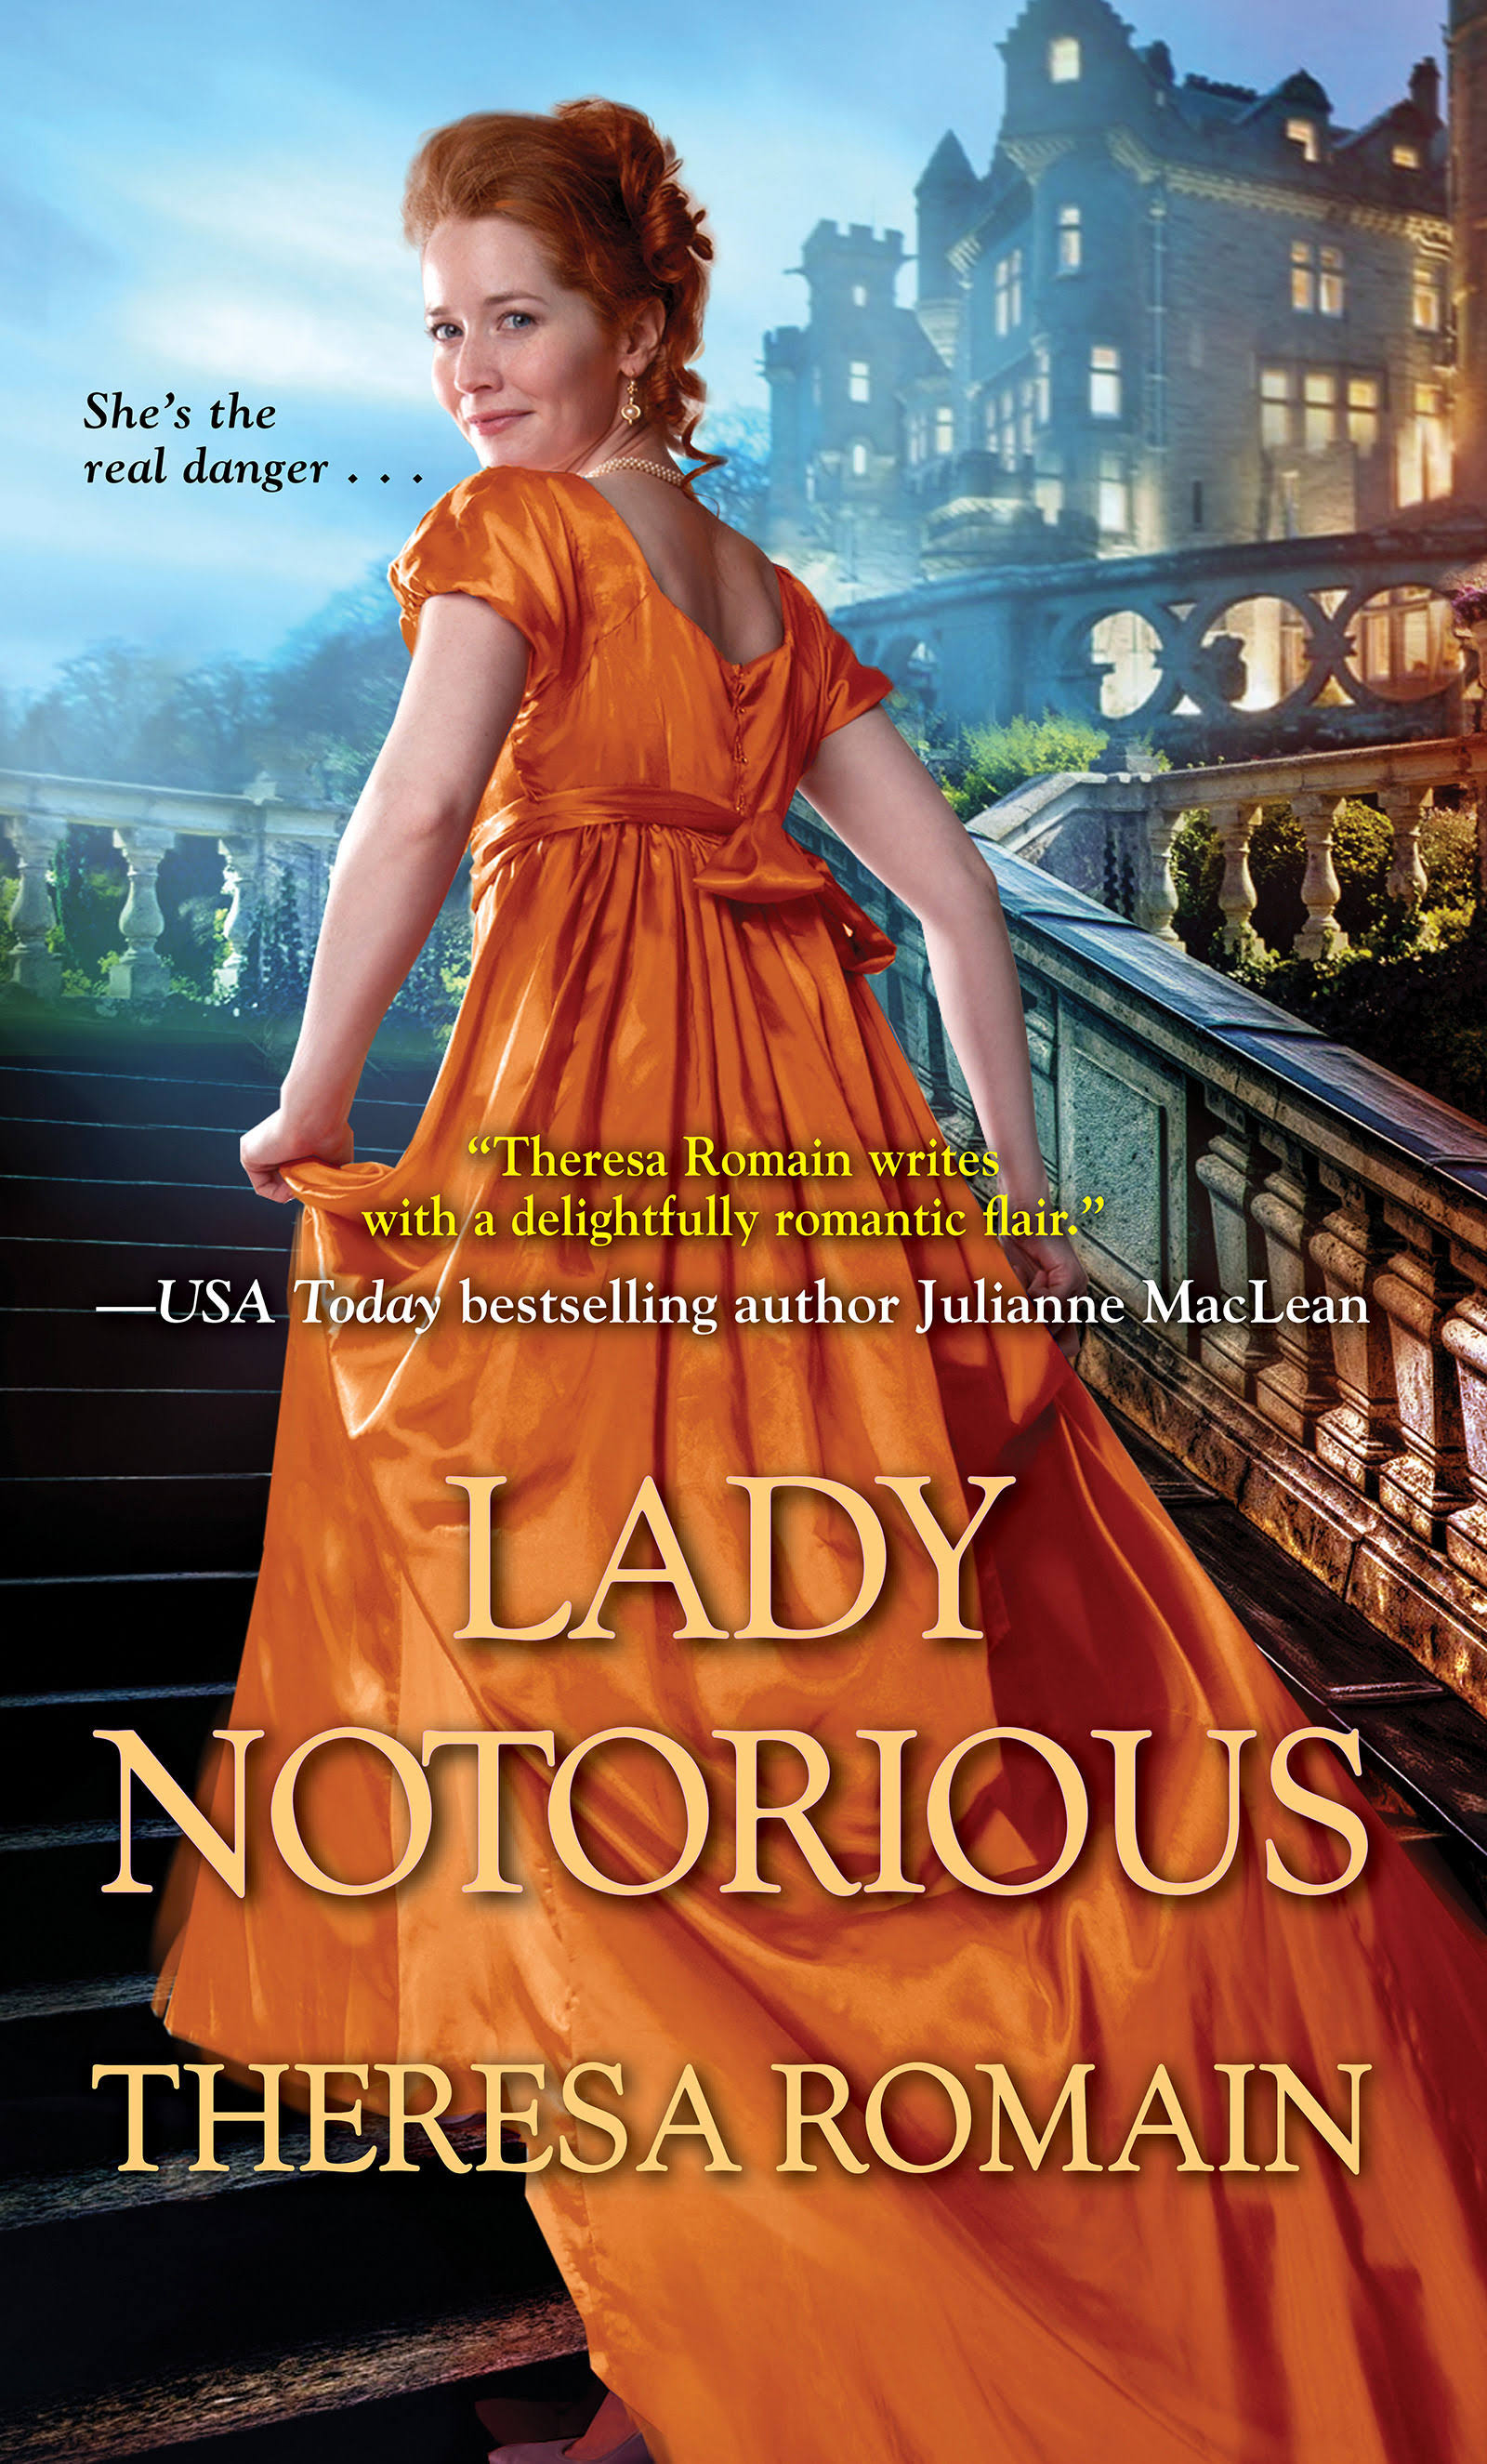 Lady Notorious [Book]